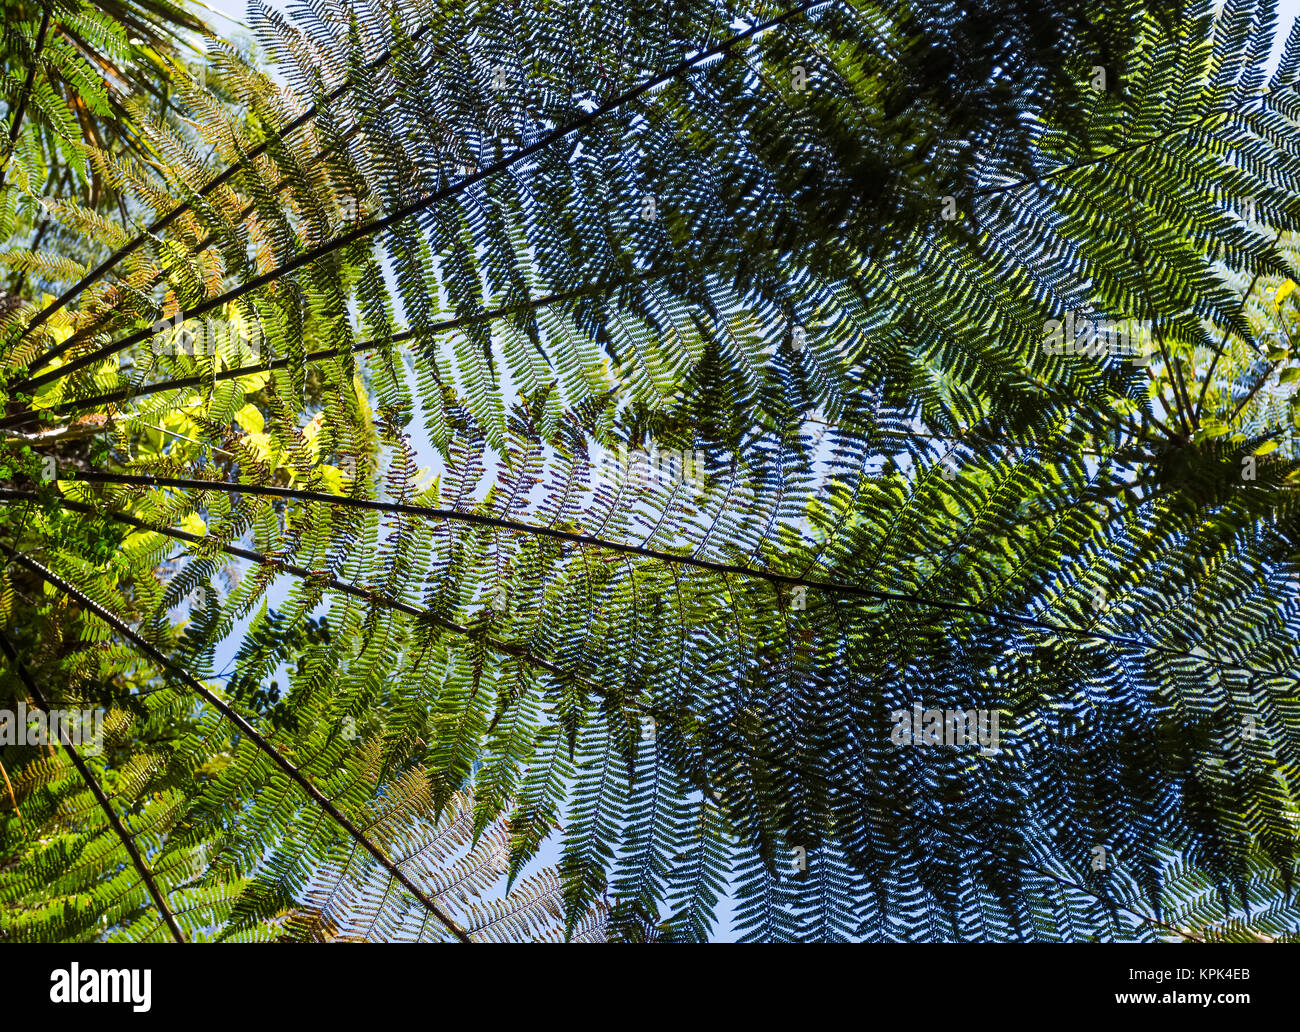 Tree ferns viewed from below with the blue sky in the background viewed through the fronds; Karamea, New Zealand Stock Photo